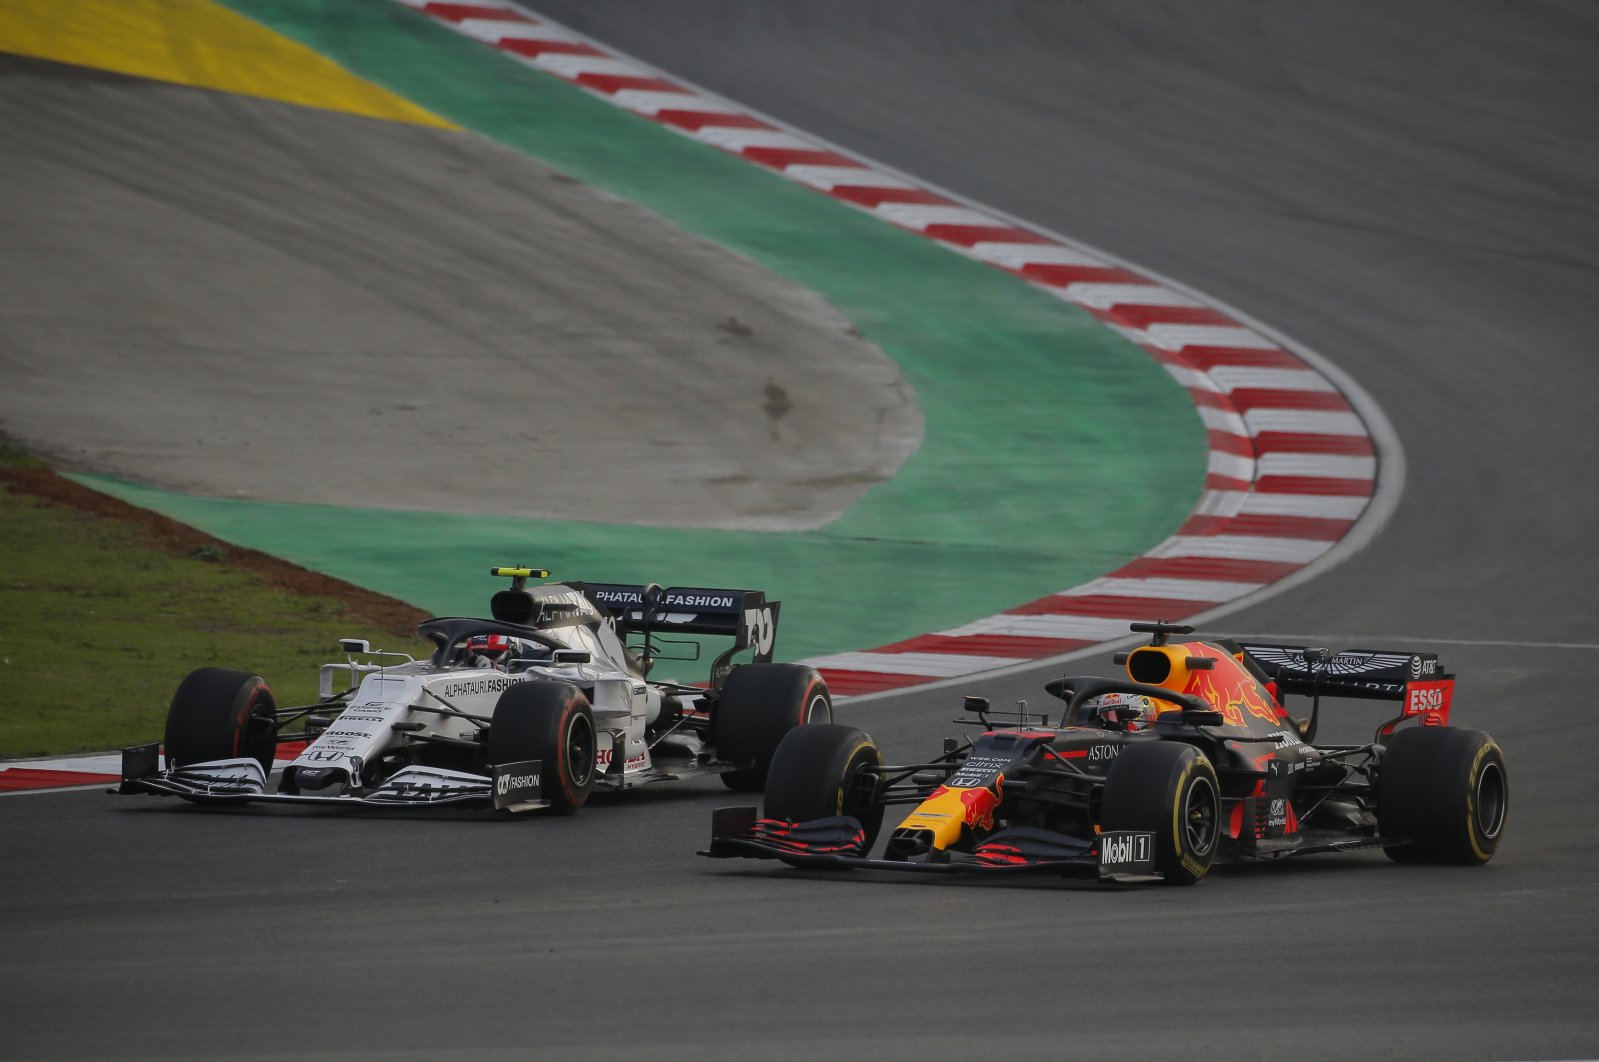 Red Bull's Dutch driver Max Verstappen (R) and AlphaTauri's French driver Pierre Gasly in action during the third practice session at the Istanbul Park circuit racetrack in Istanbul, Nov. 14, 2020. (AP Photo)